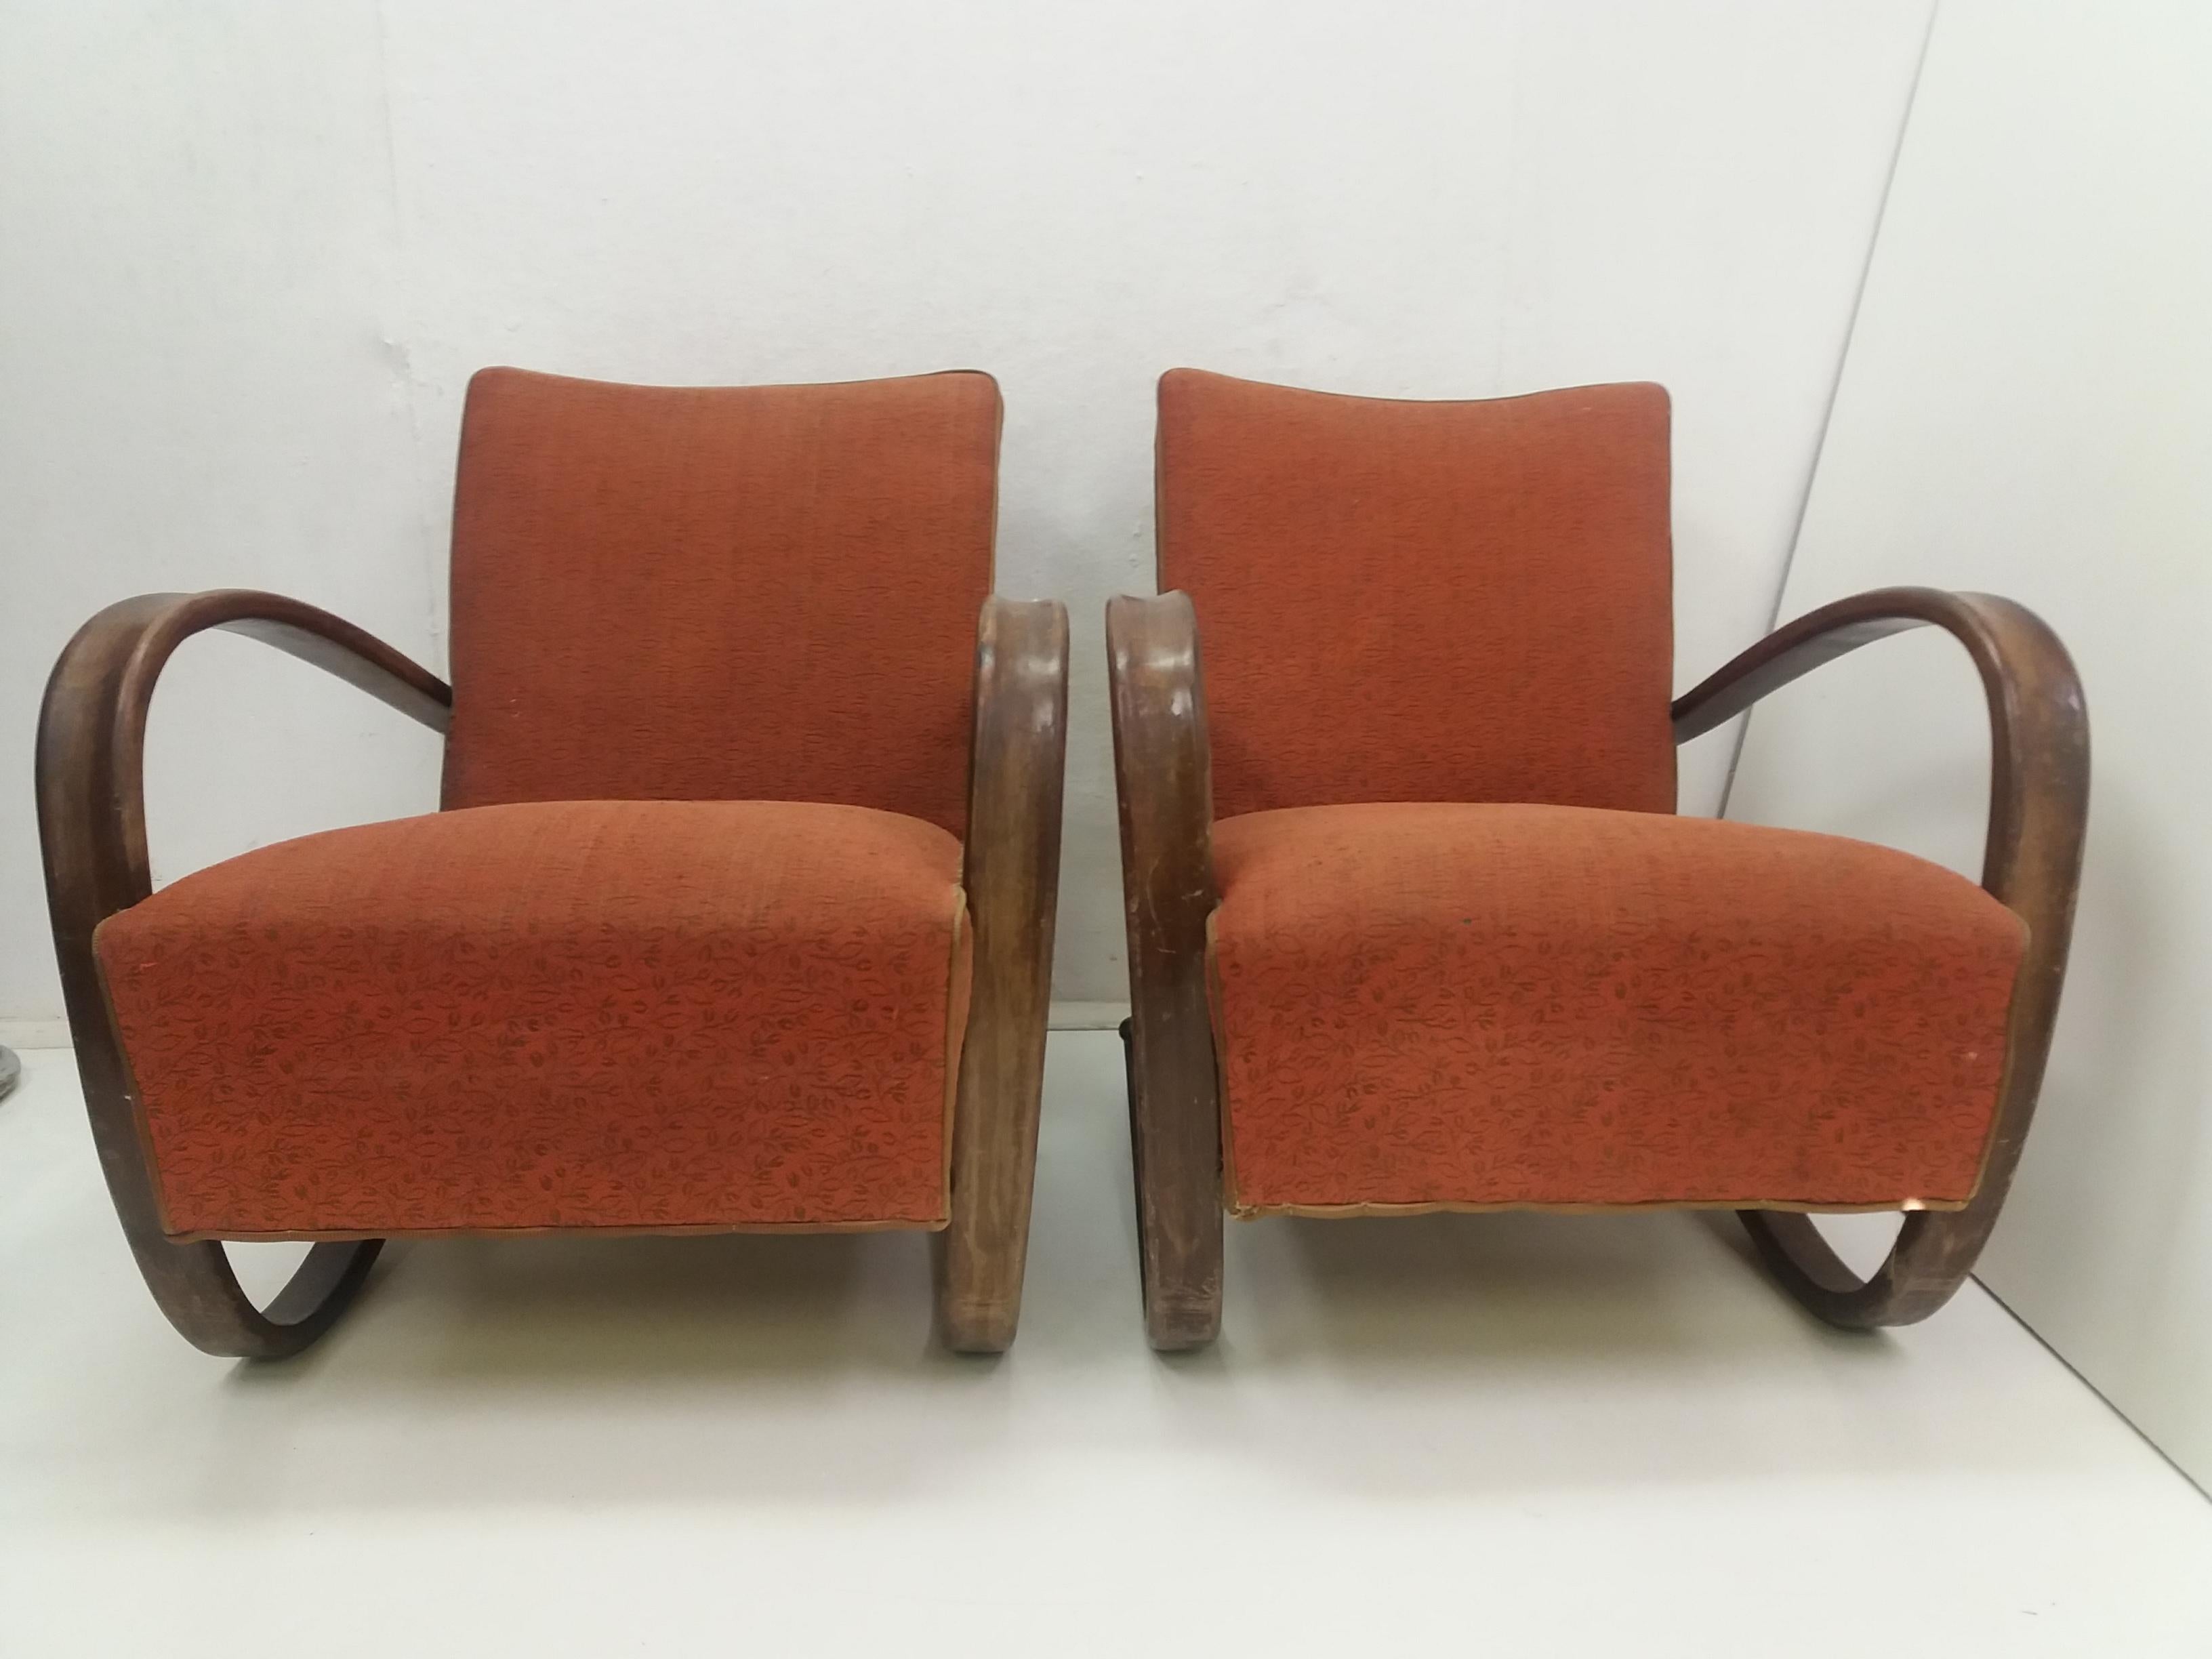 1930 Pair of Armchairs + Spider Table, by Halabala for Thonet, Czechoslovakia For Sale 6